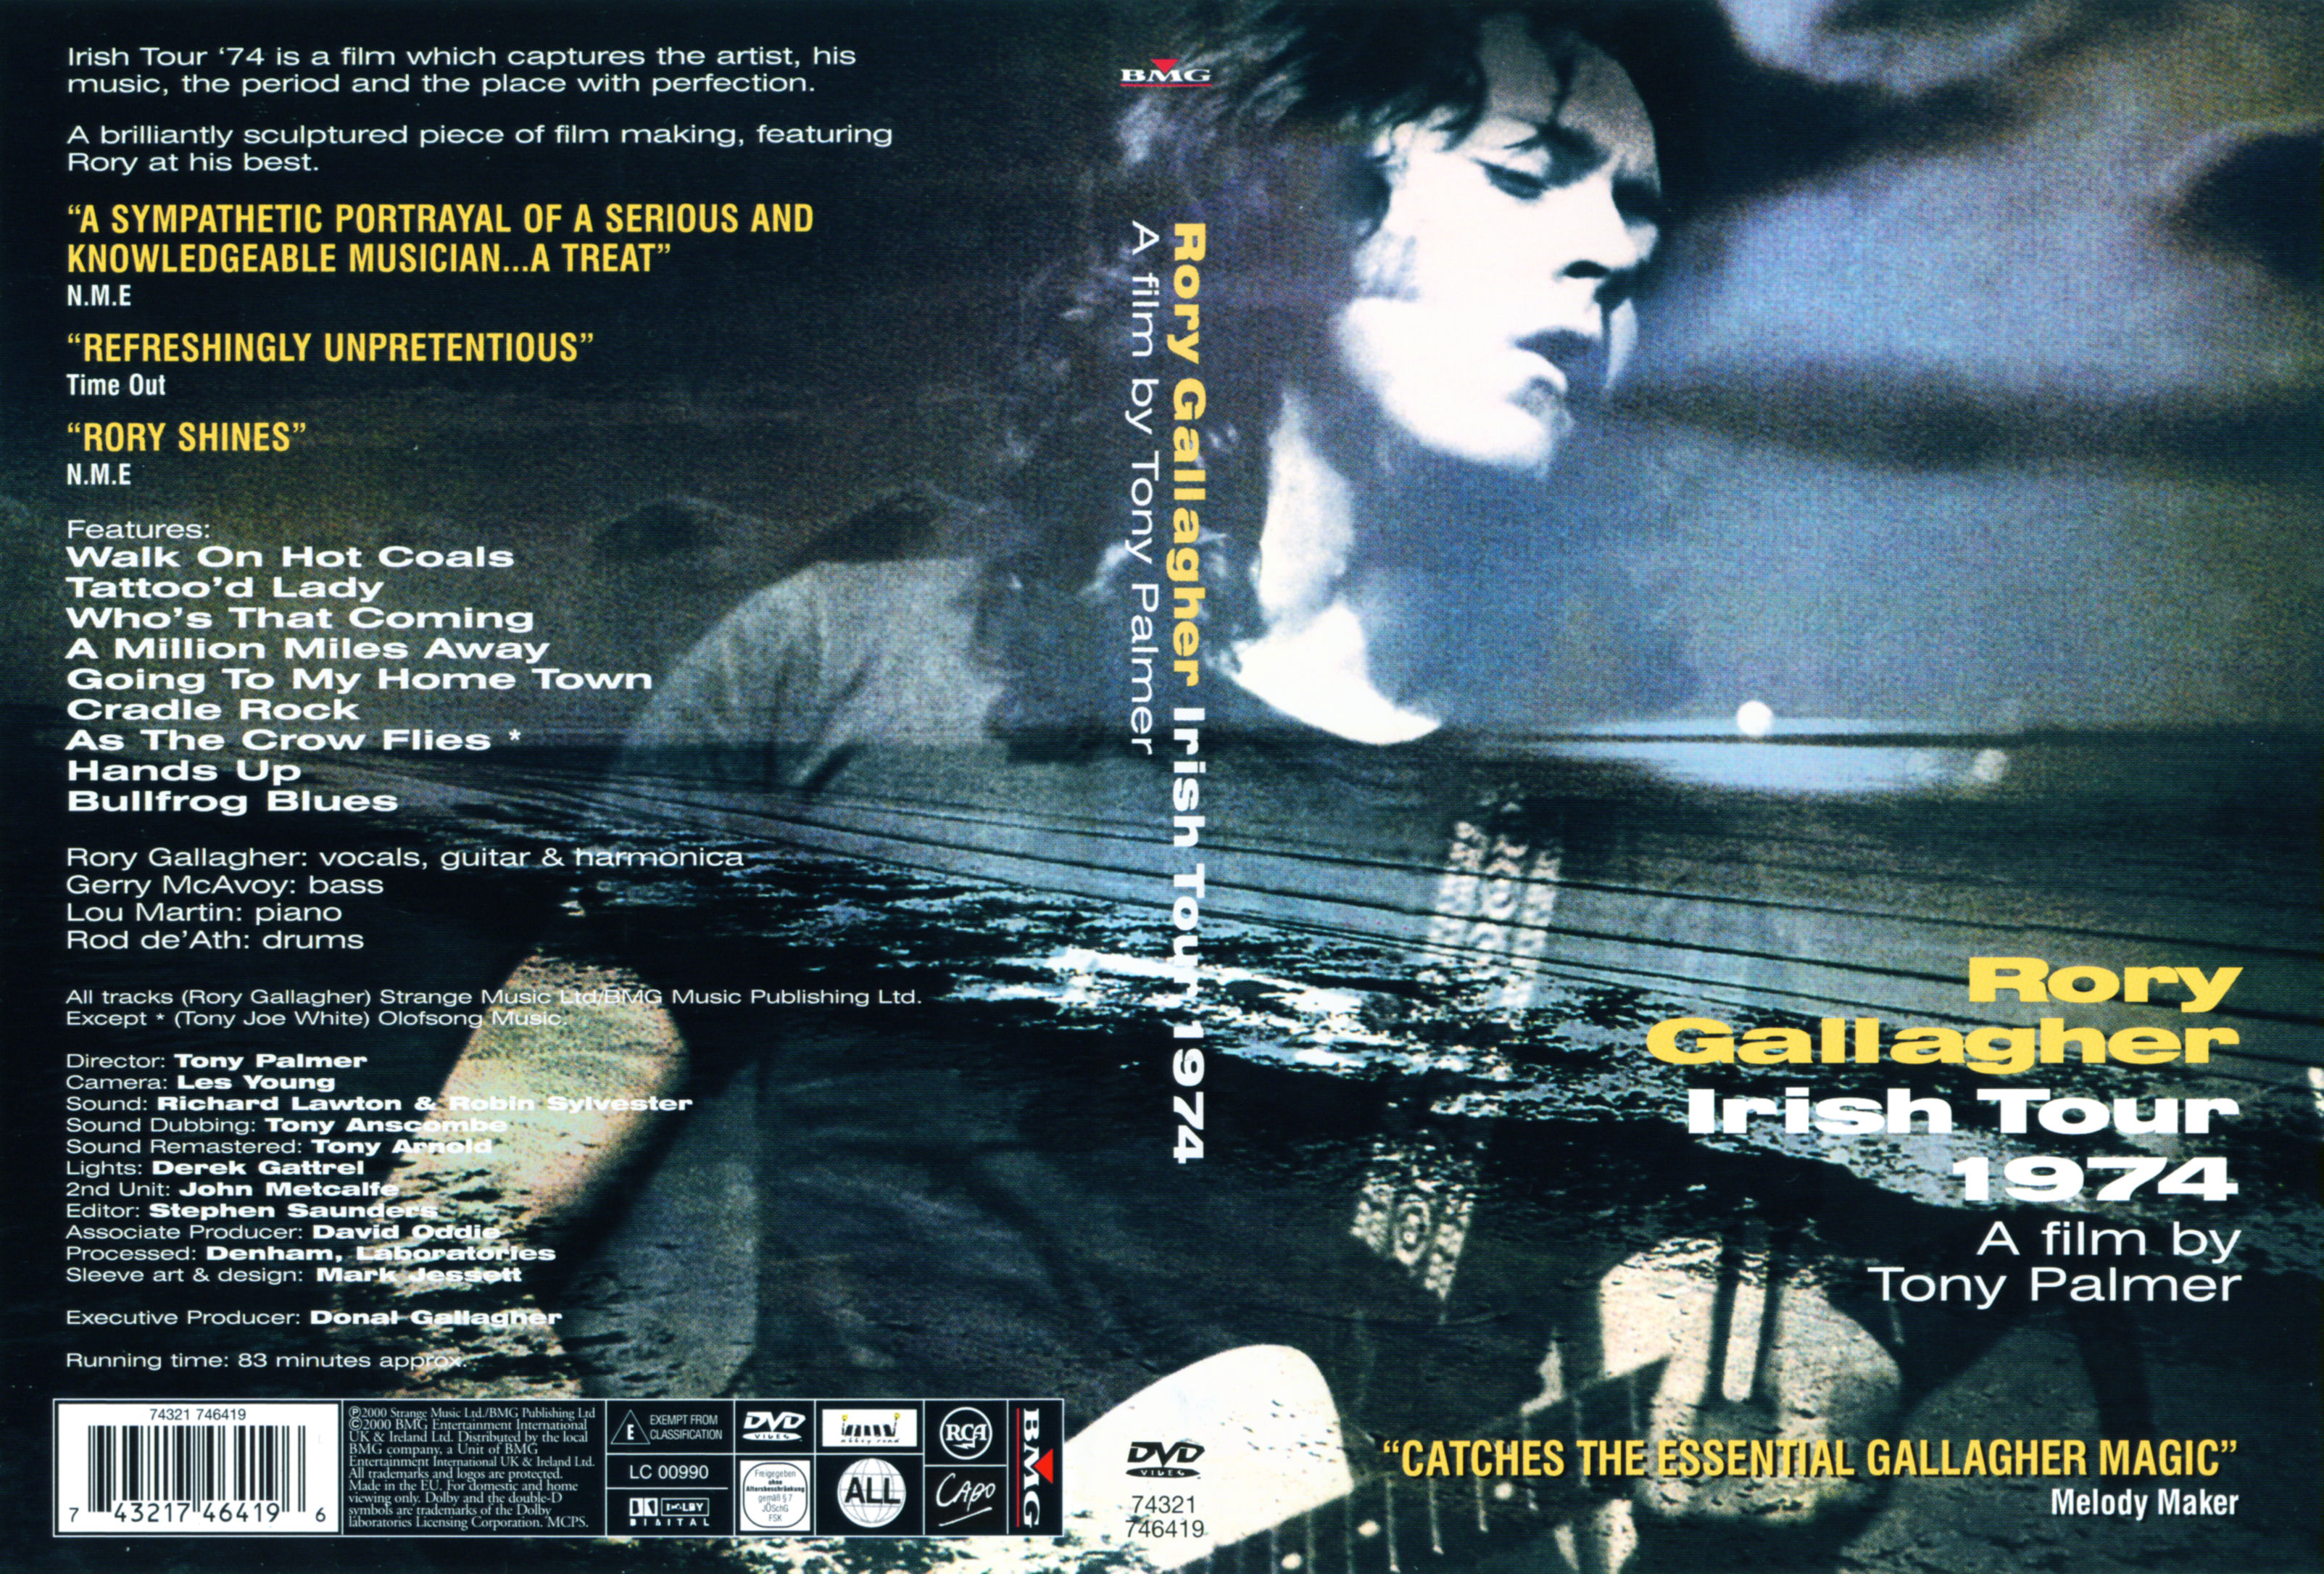 Jaquette DVD Rory Gallagher - Irish Tour 1974